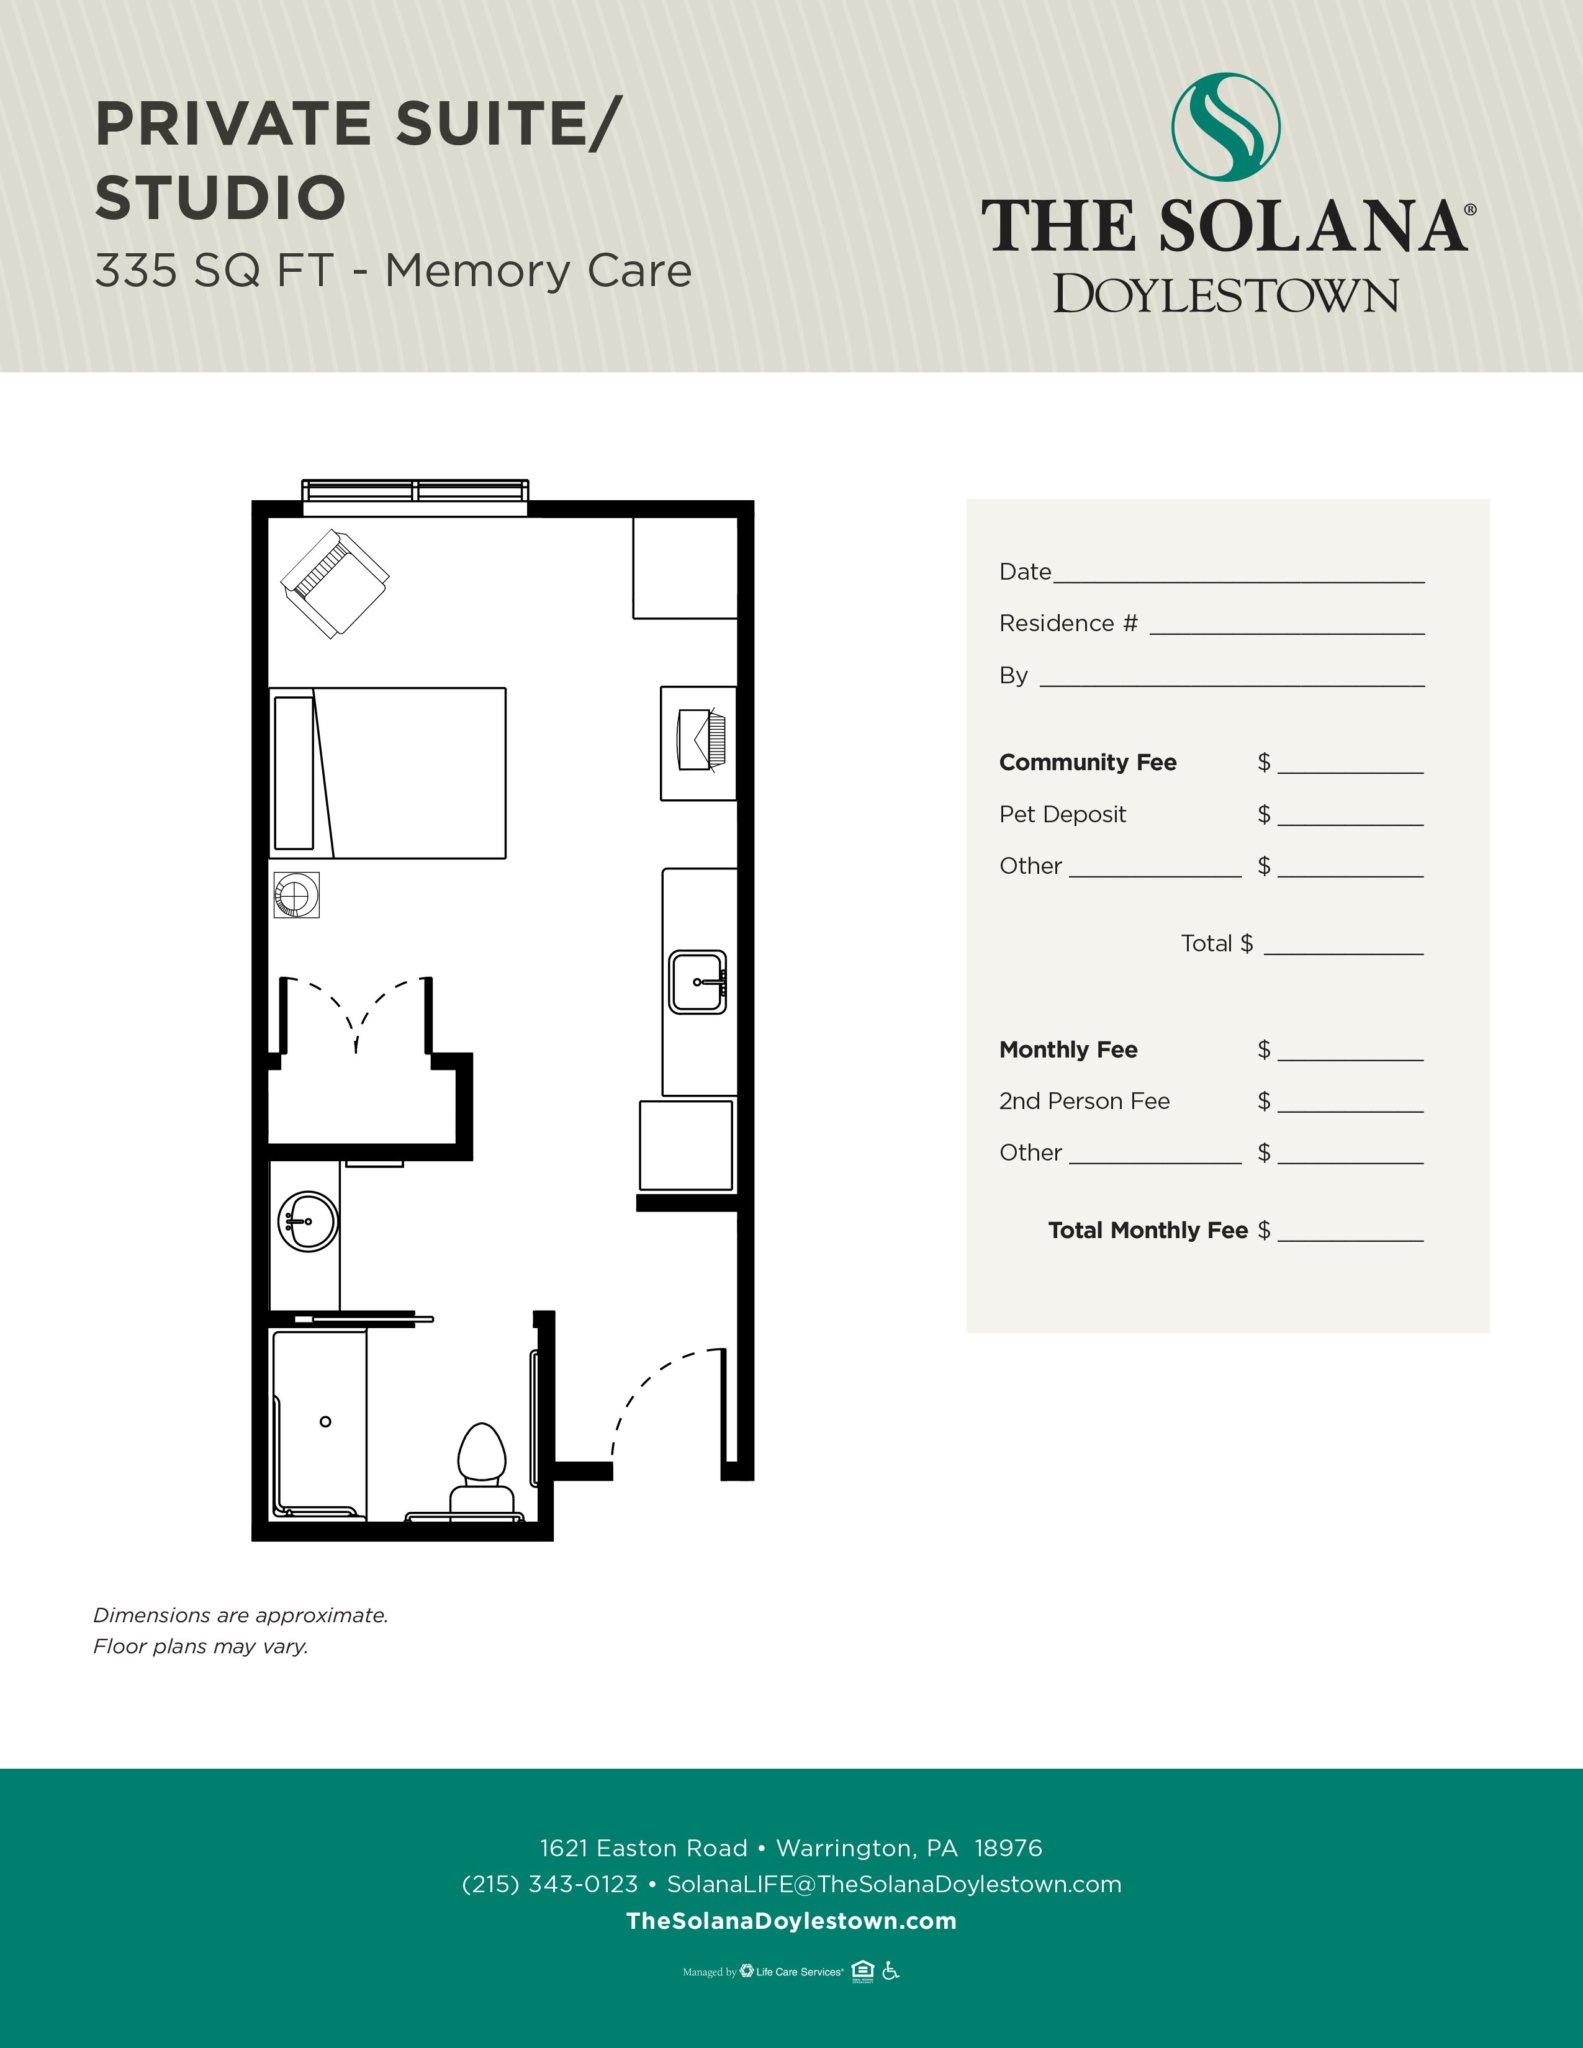 Floor plan of a 335 sq ft private suite or studio memory care unit at The Solana Doylestown.